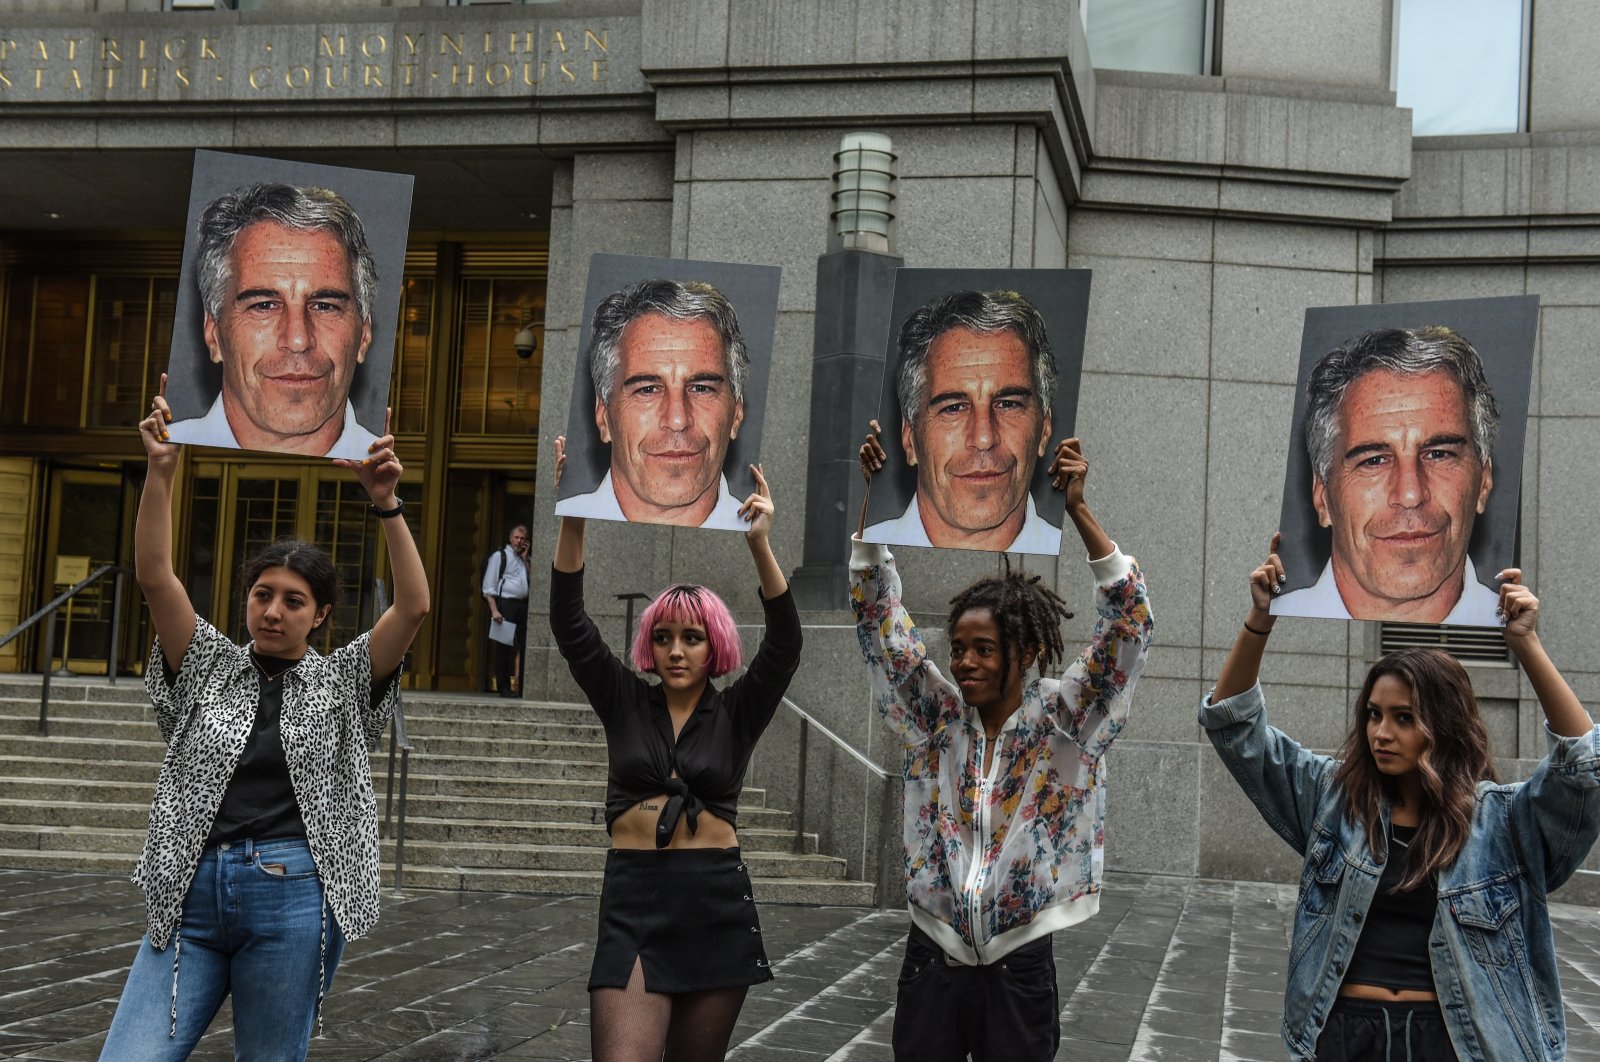 A protest group hold up signs of Jeffrey Epstein in front of the Federal courthouse, in New York City, U.S., July 8, 2019. (Getty Images)